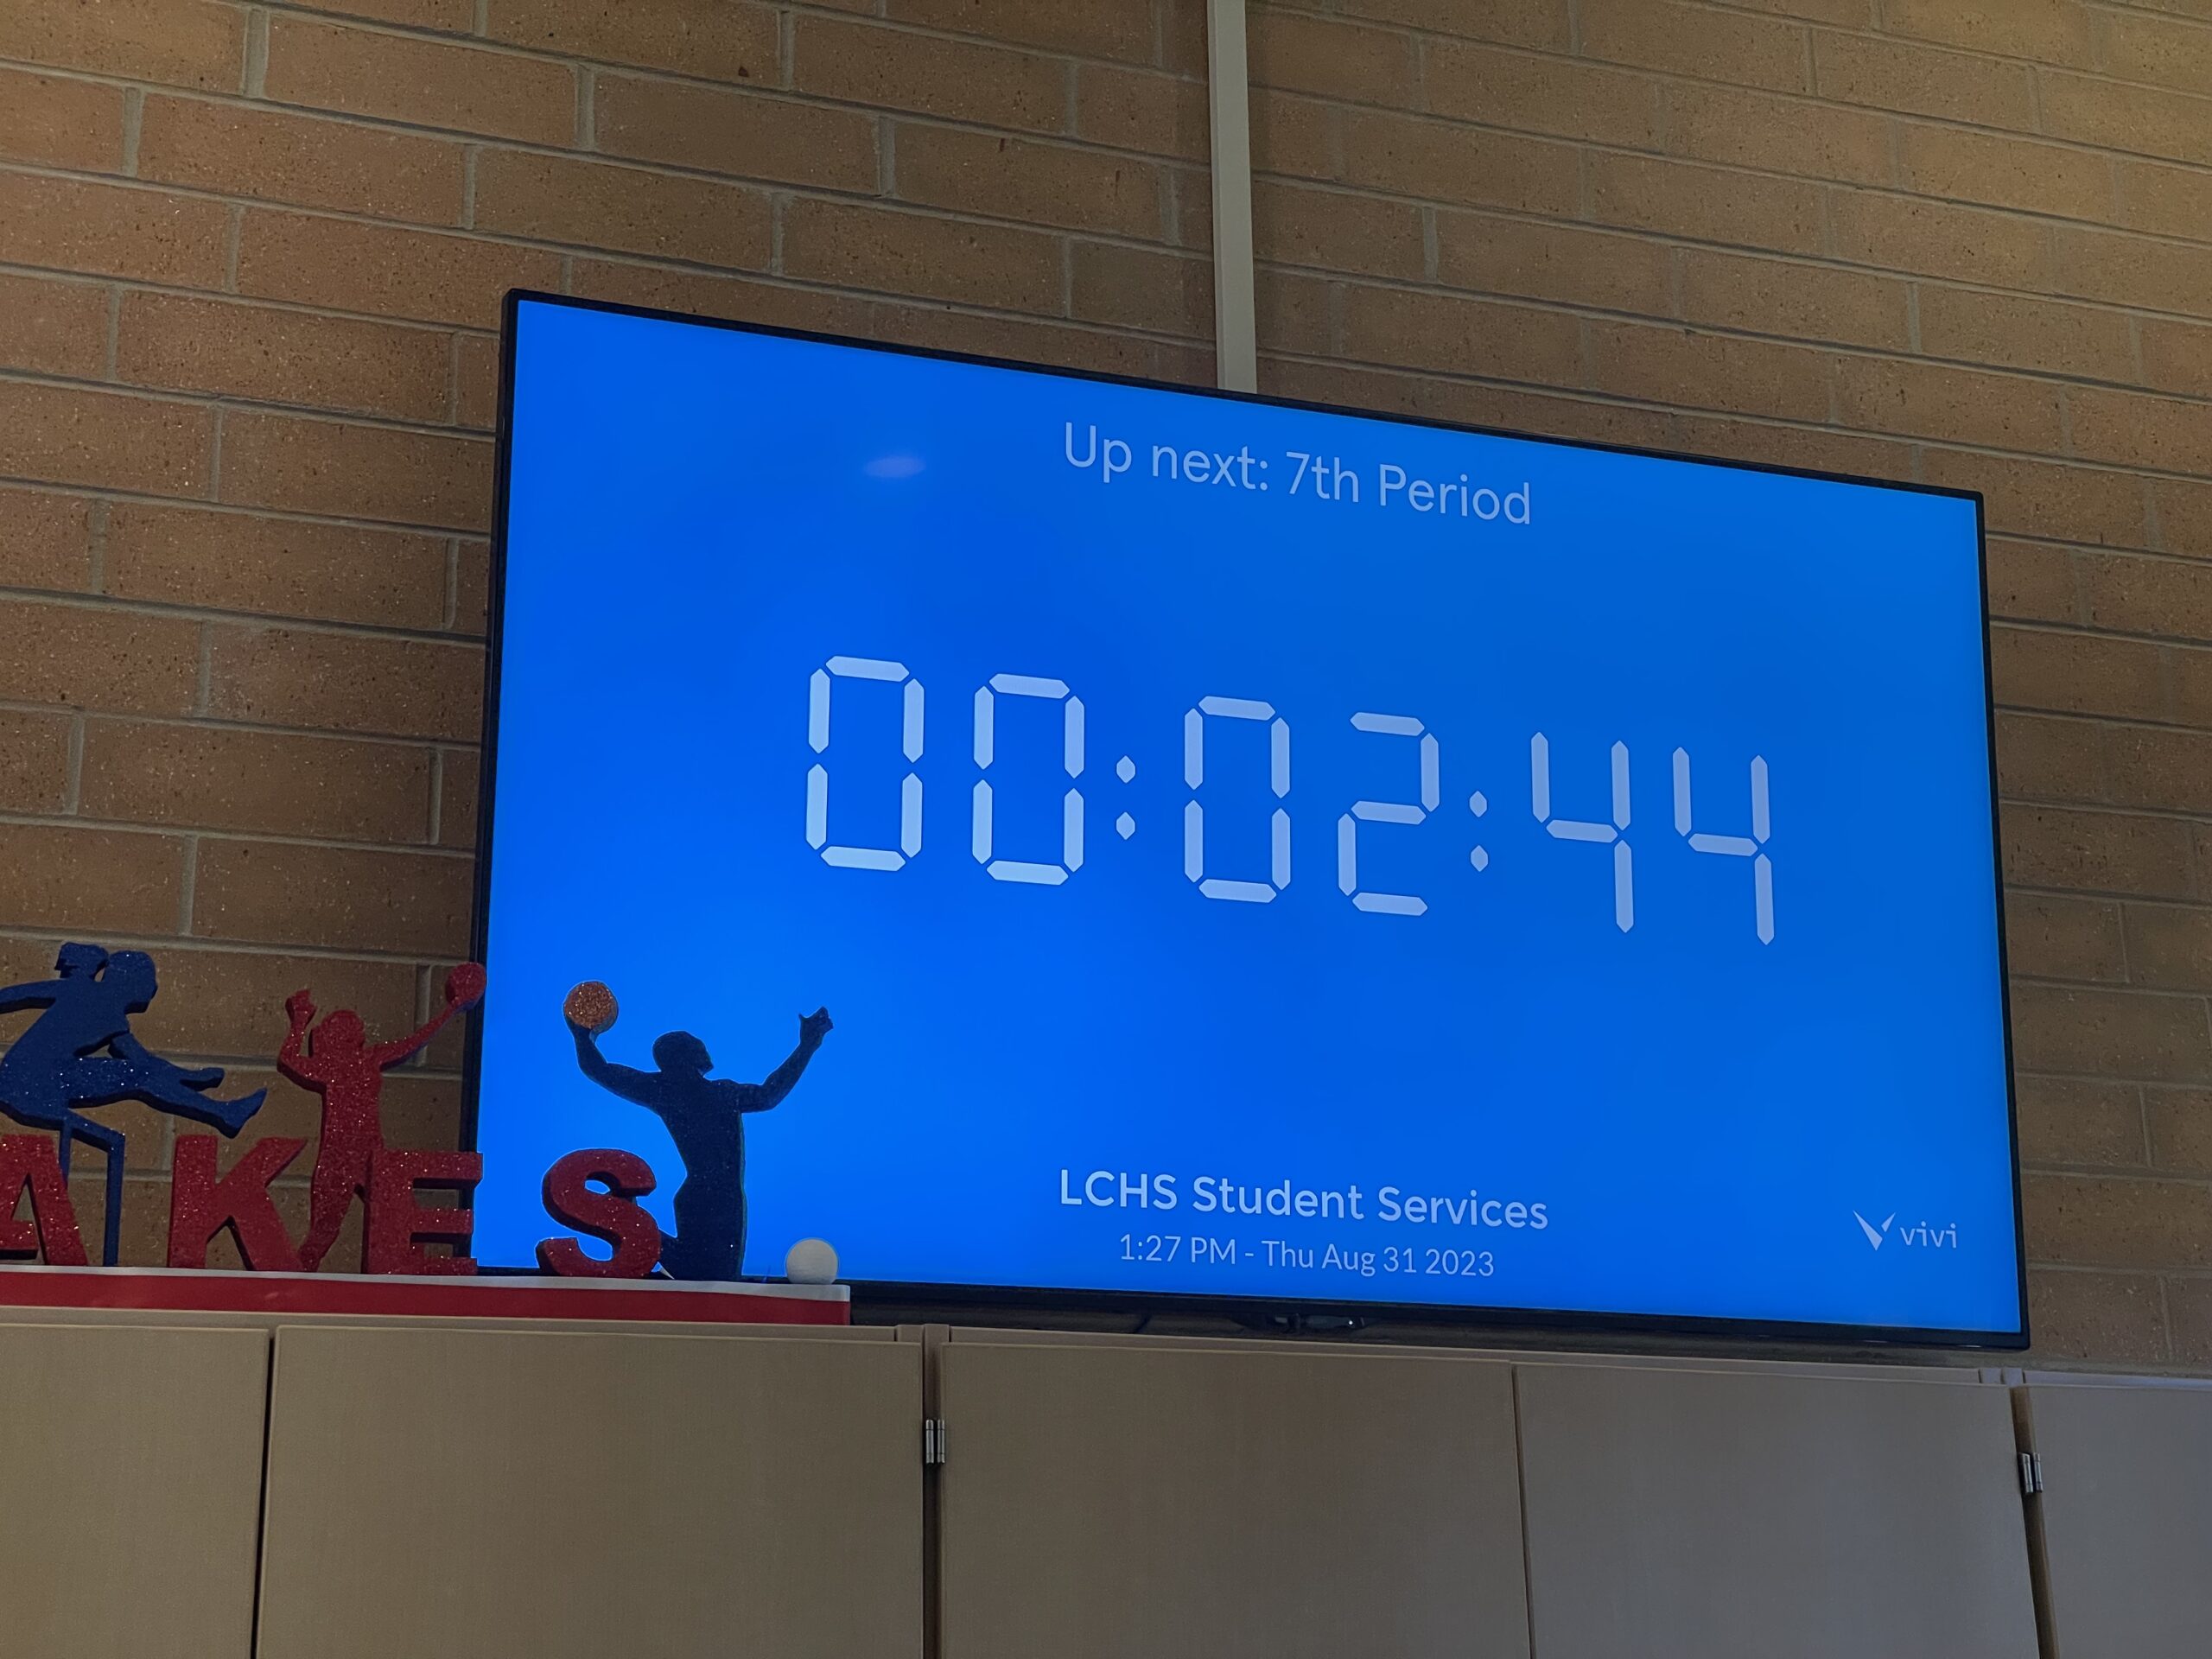 A flat panel display shows a countdown timer on the wall of a school hallway, helping students know how much more time they have before the bell rings.